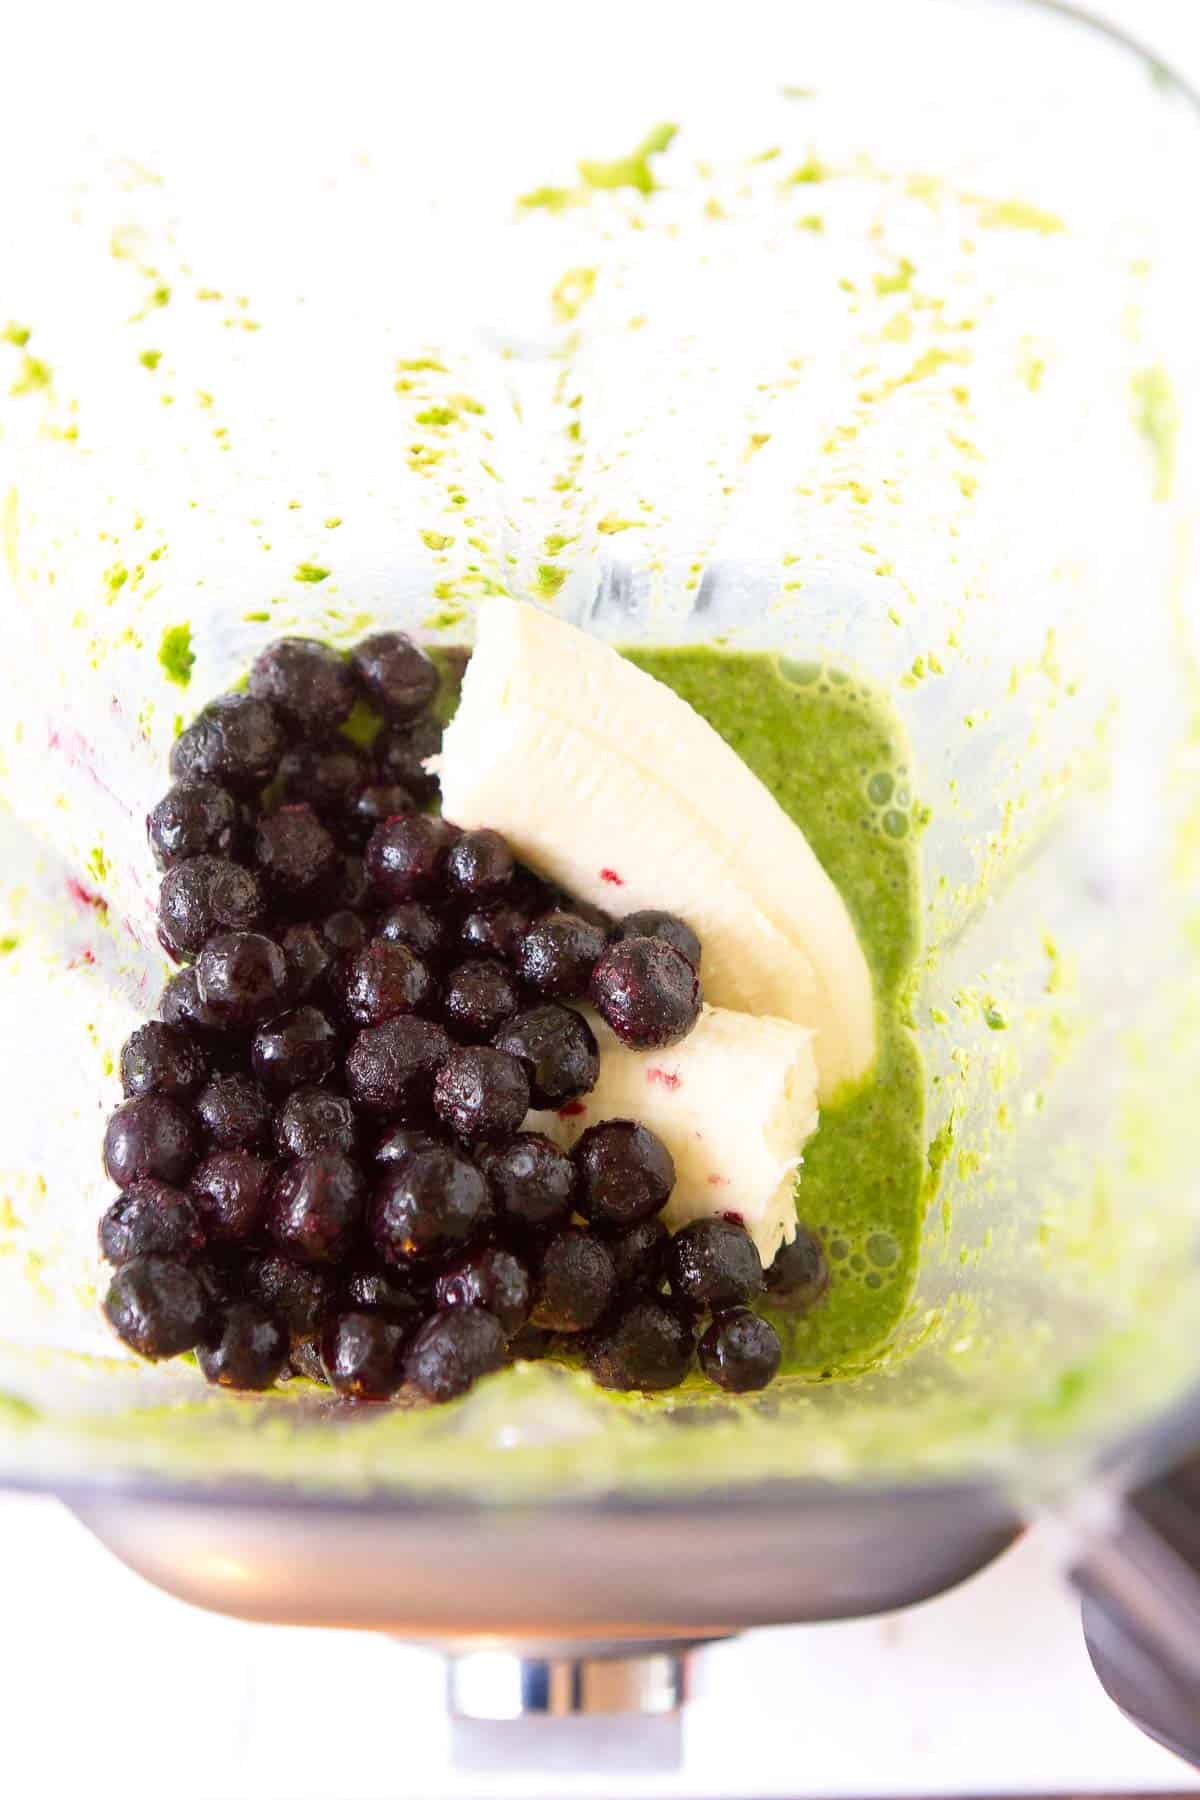 Frozen blueberries, banana and pureed spinach in a blender.